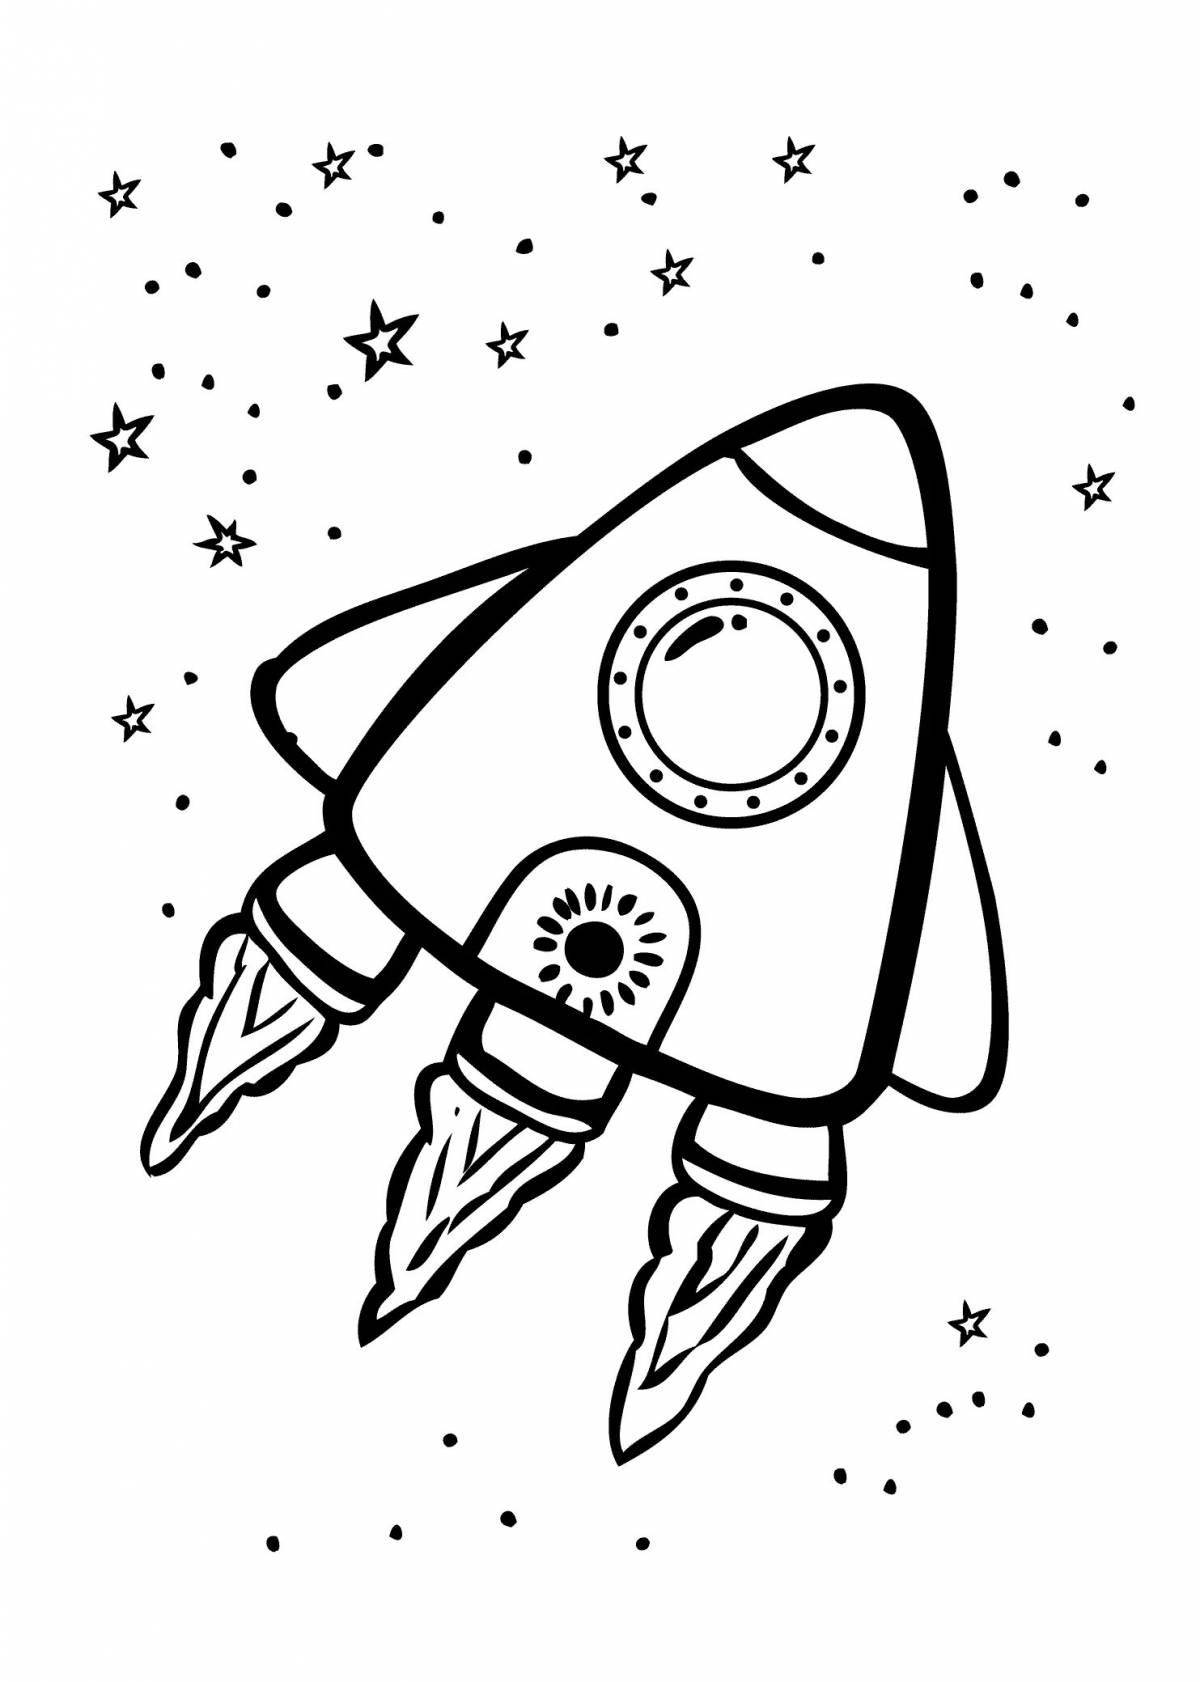 Galactic space coloring book for boys